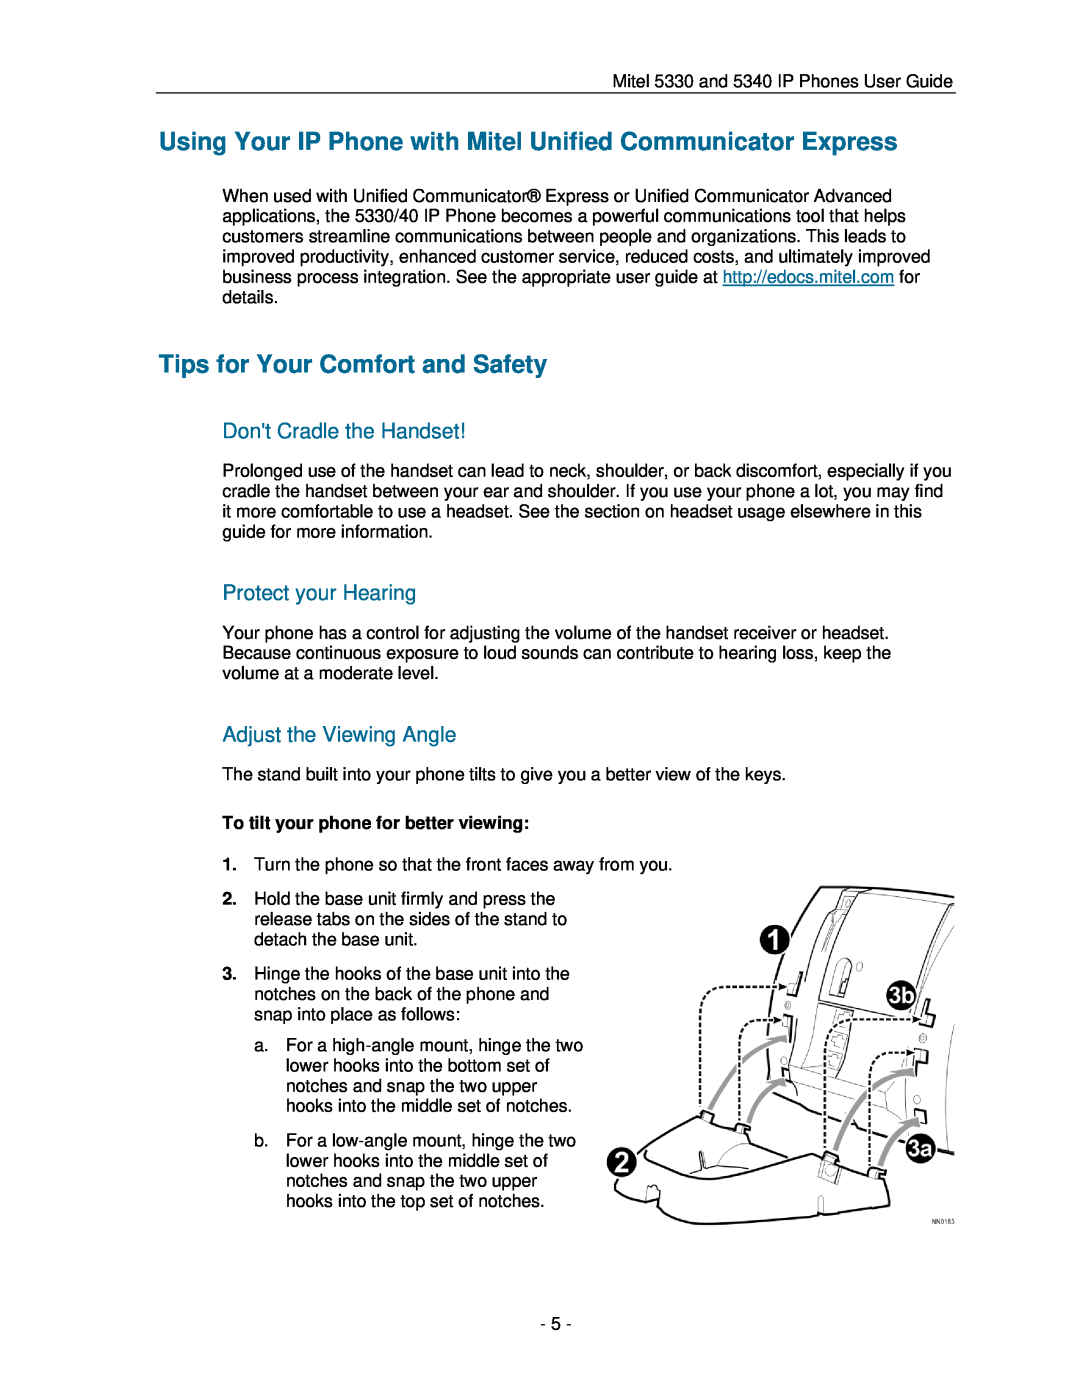 Mitel 5330 manual Tips for Your Comfort and Safety, Dont Cradle the Handset, Protect your Hearing, Adjust the Viewing Angle 